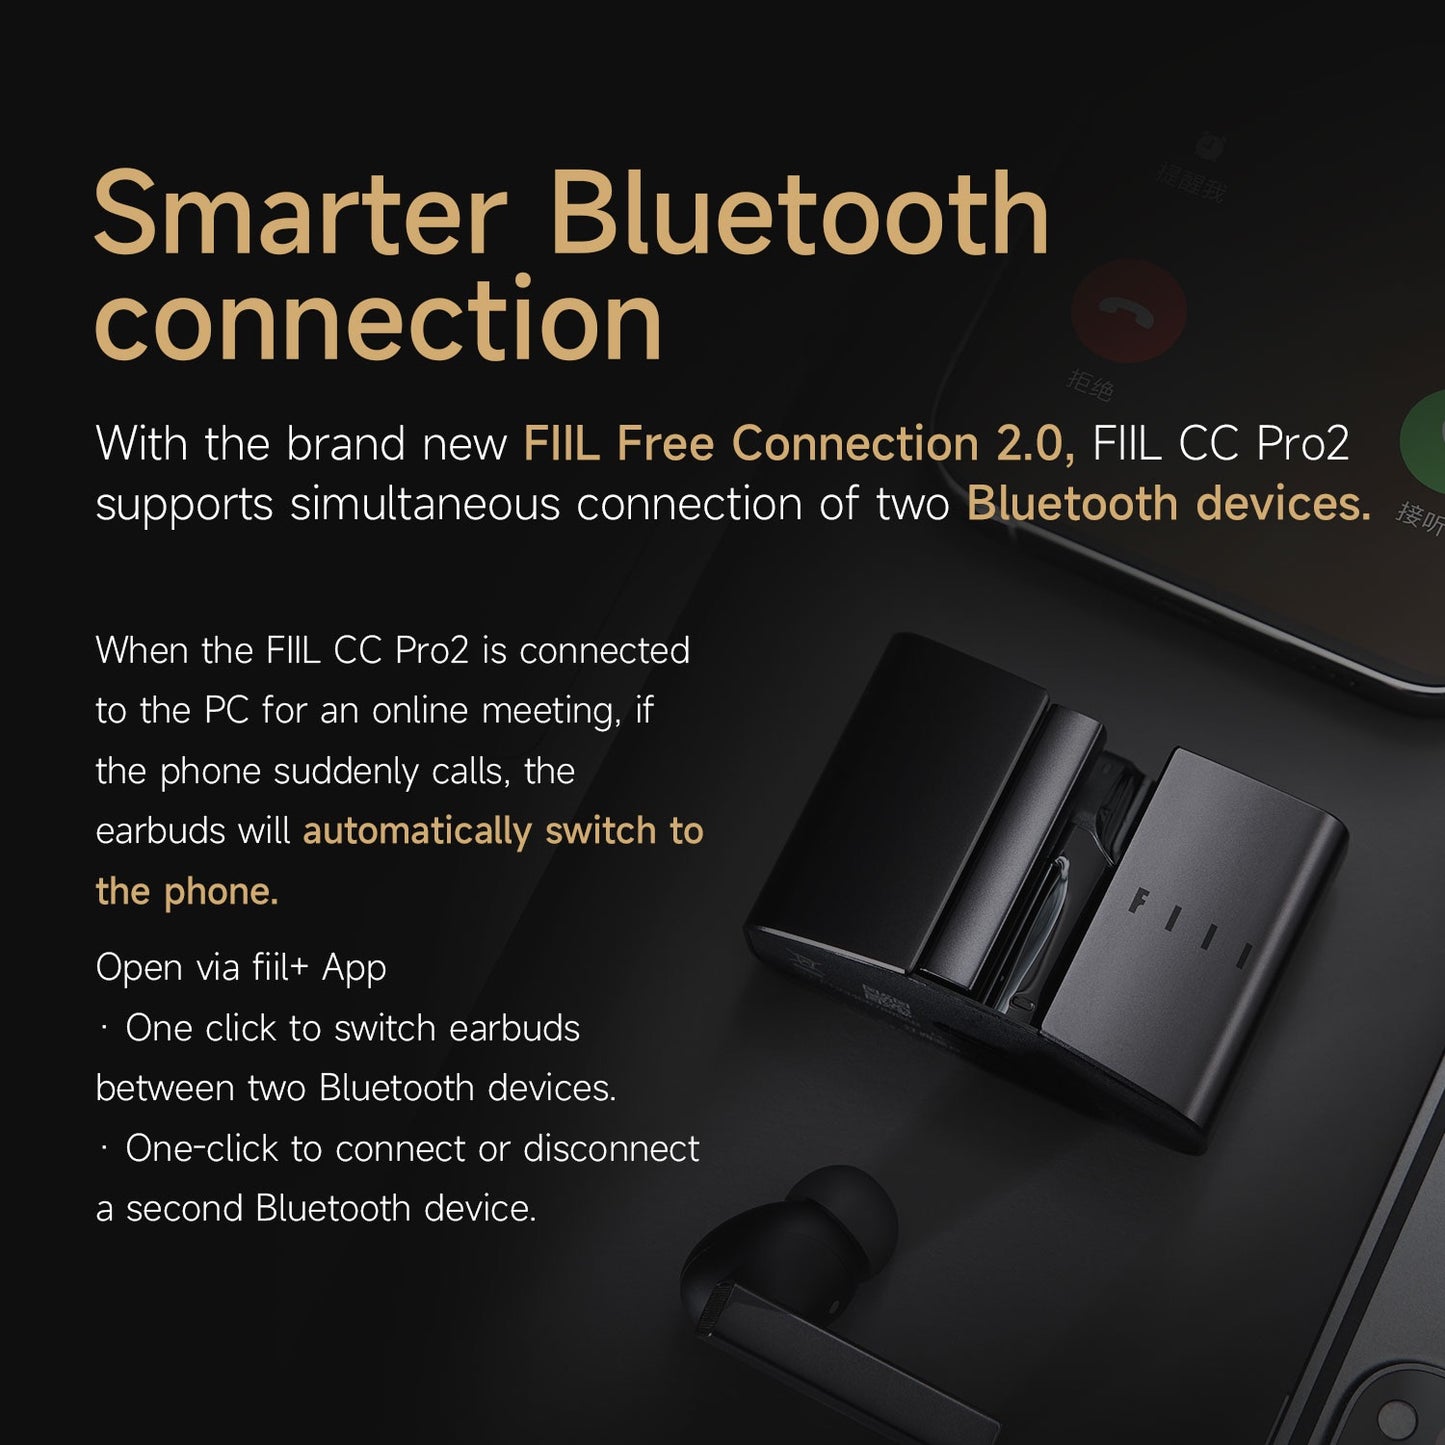 FIIL CC Pro2 English Ver. True Wireless Earbuds 42dB Hybrid ANC, All-Metal Design, 32 Hours of Battery Life, support fiil+ App